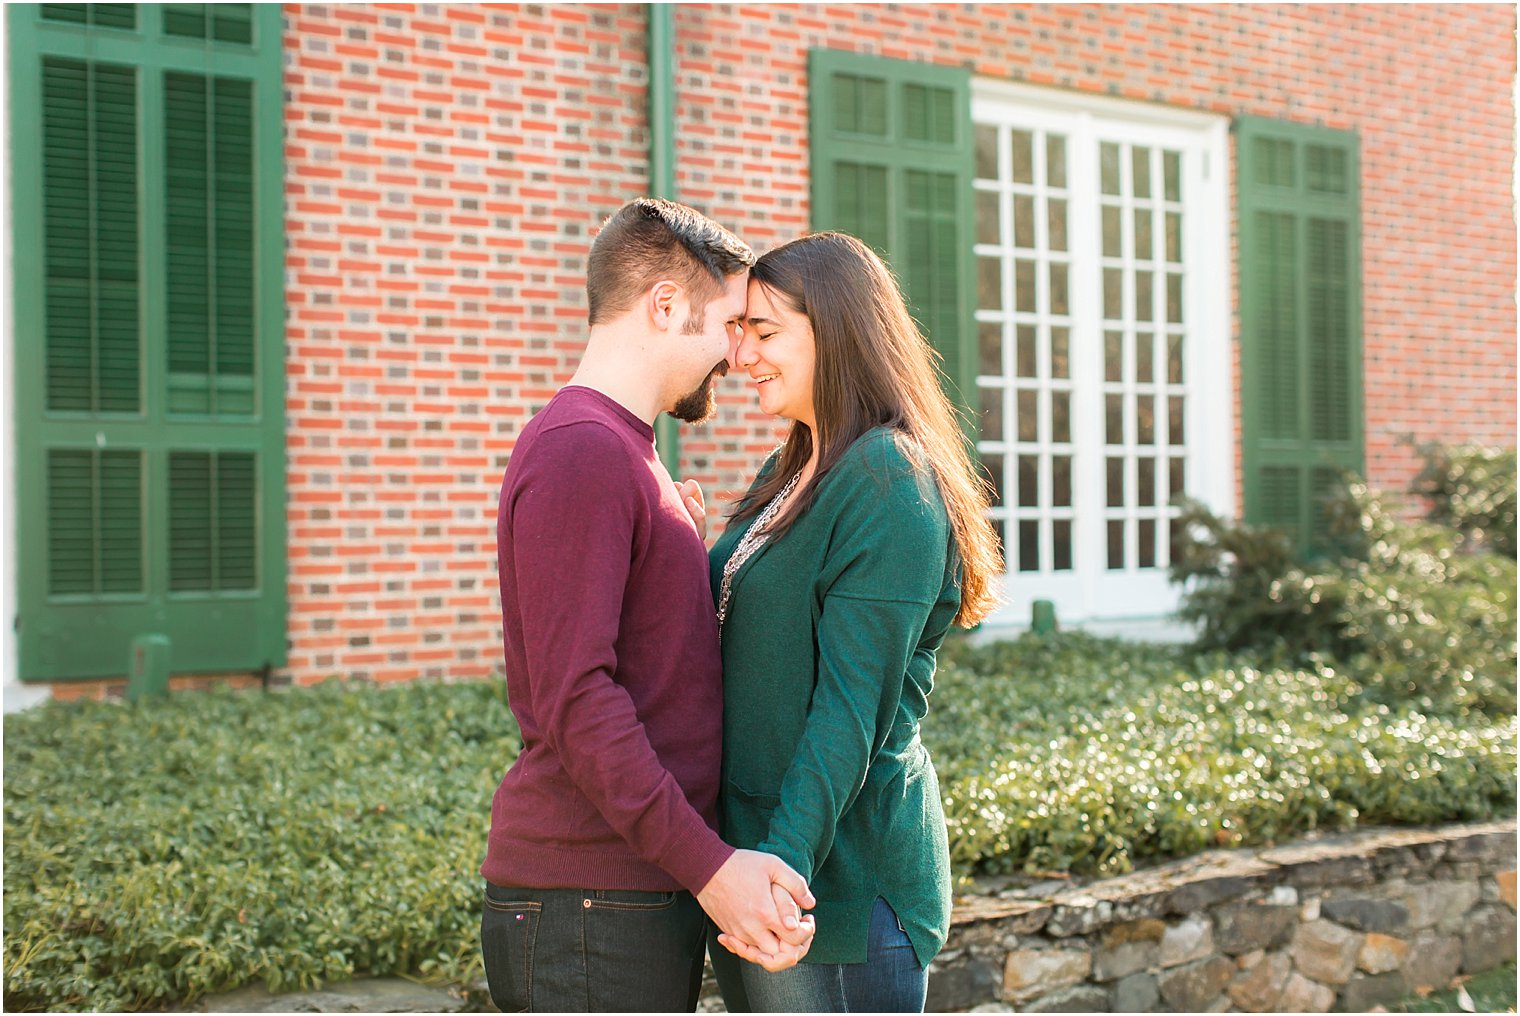 Engagement session in PA | Photo by Idalia Photography